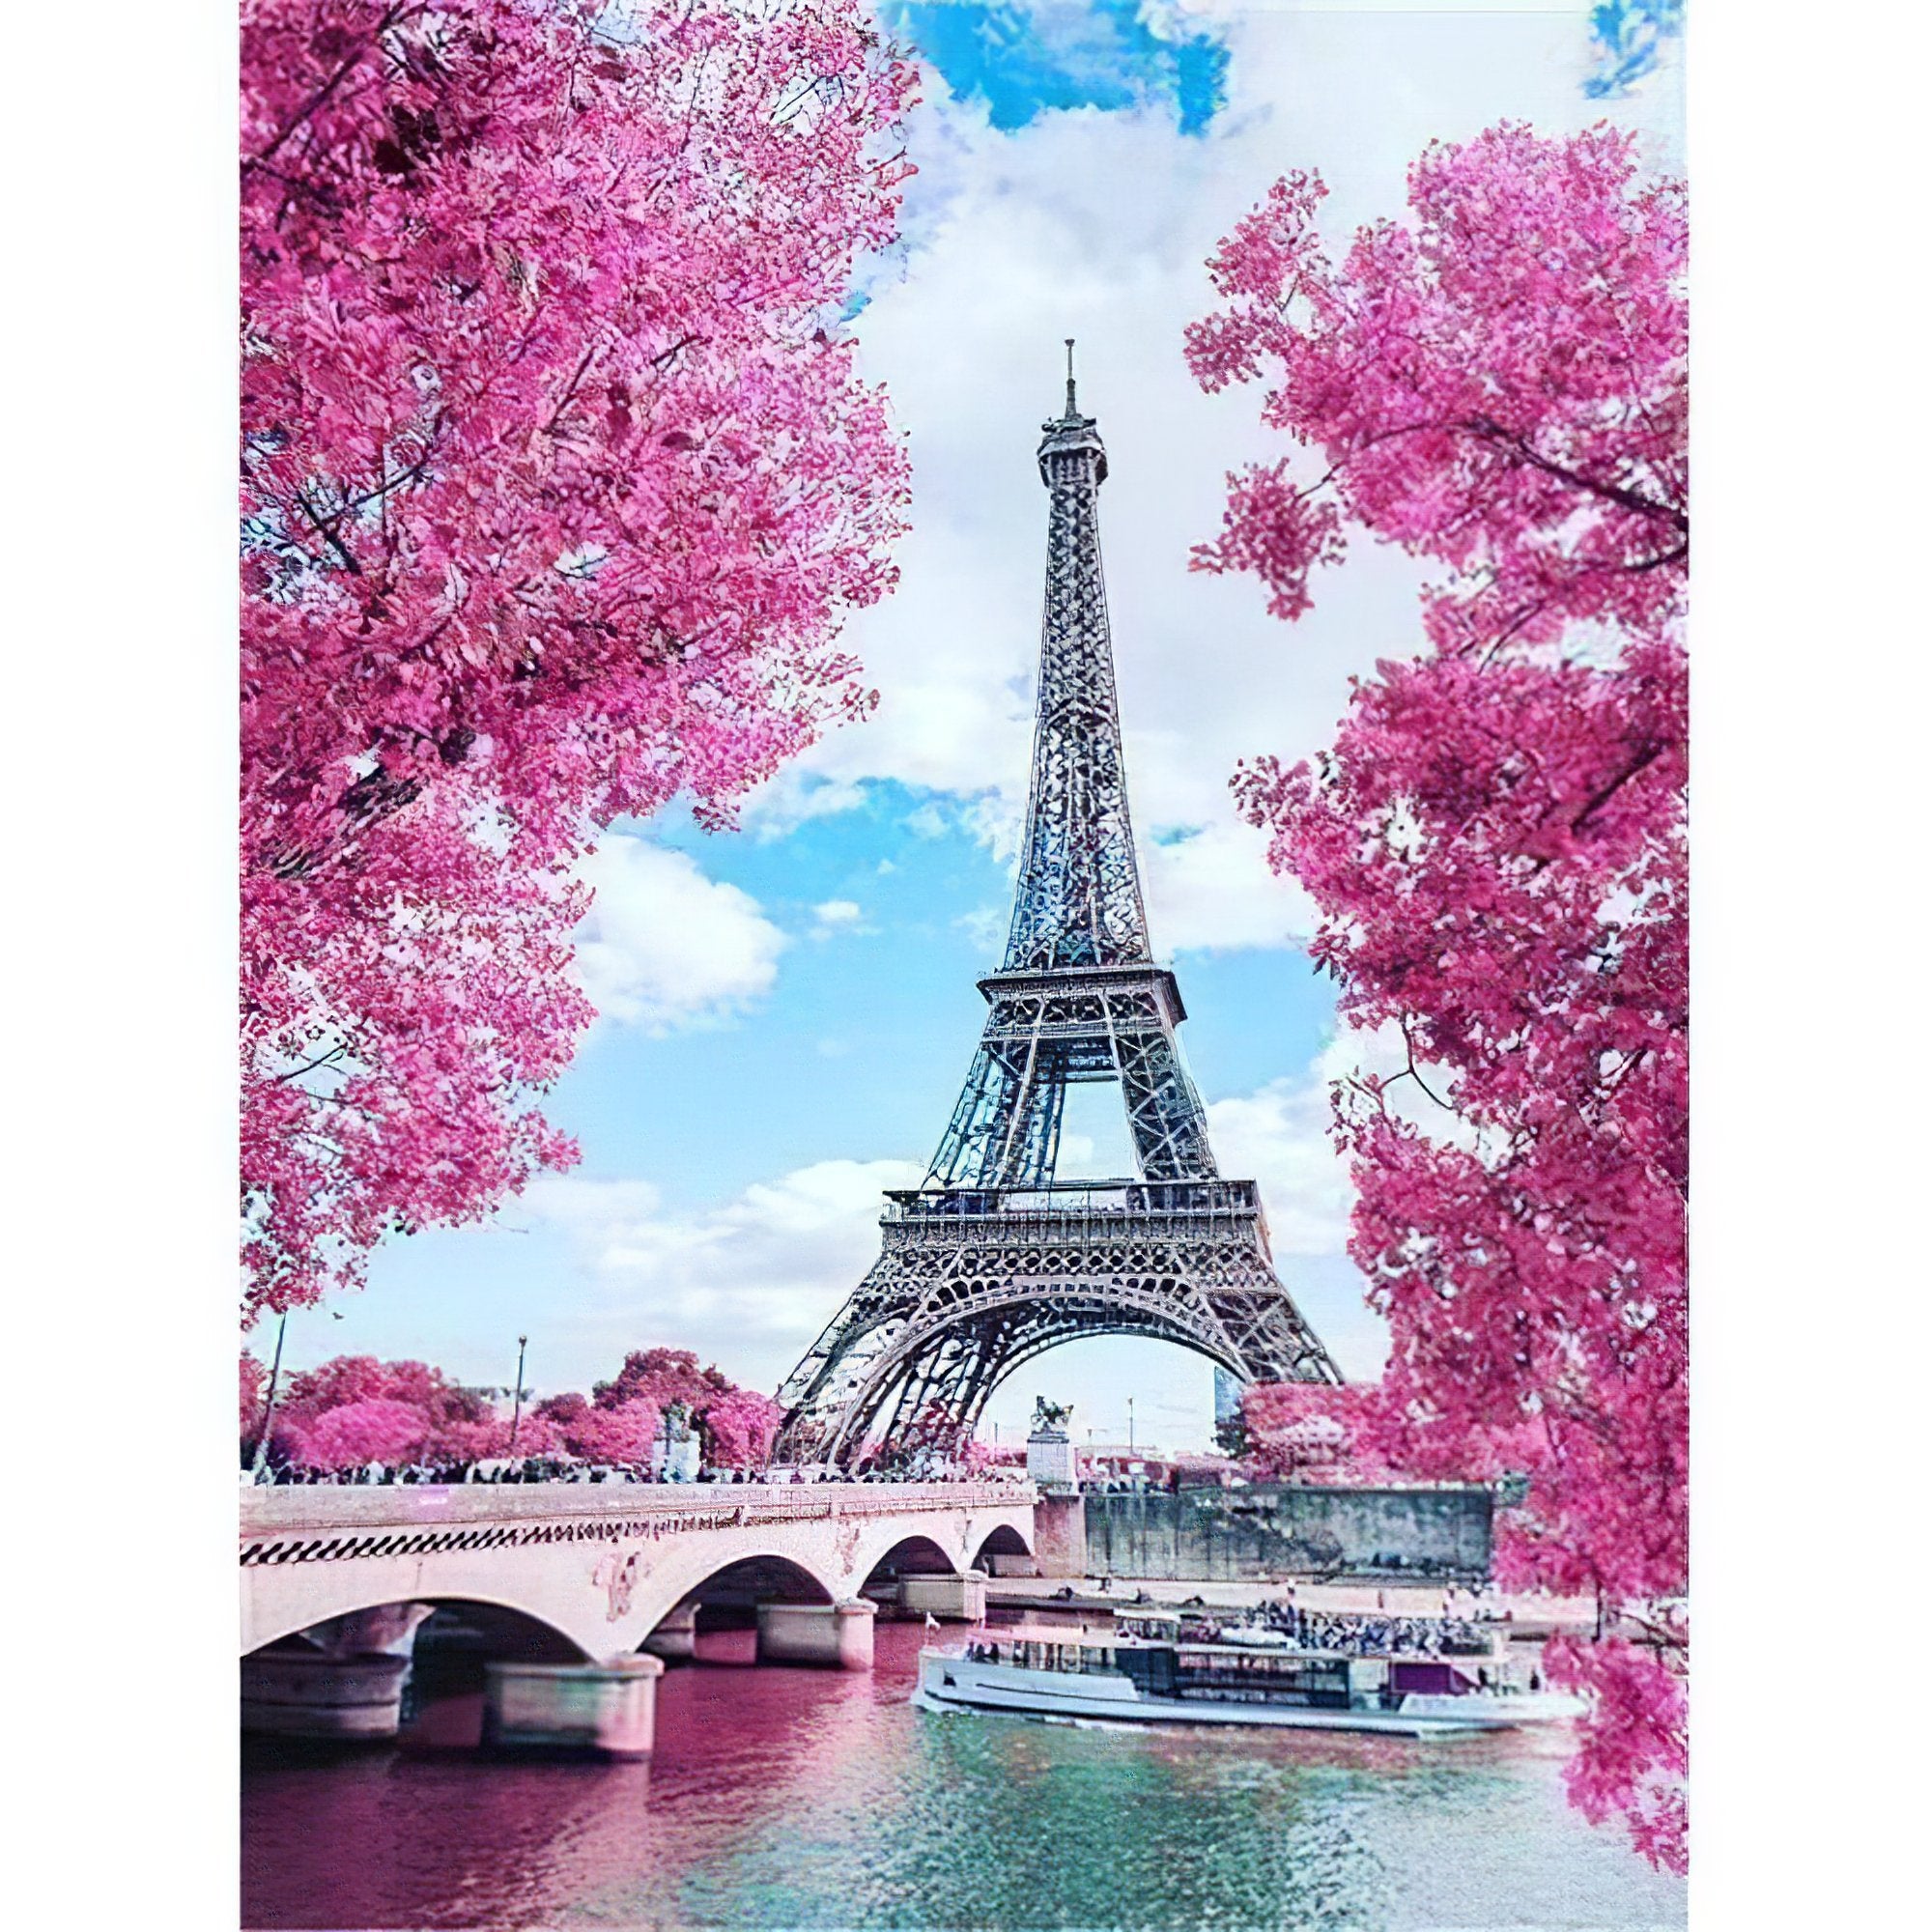 Eiffel Tower And Roses